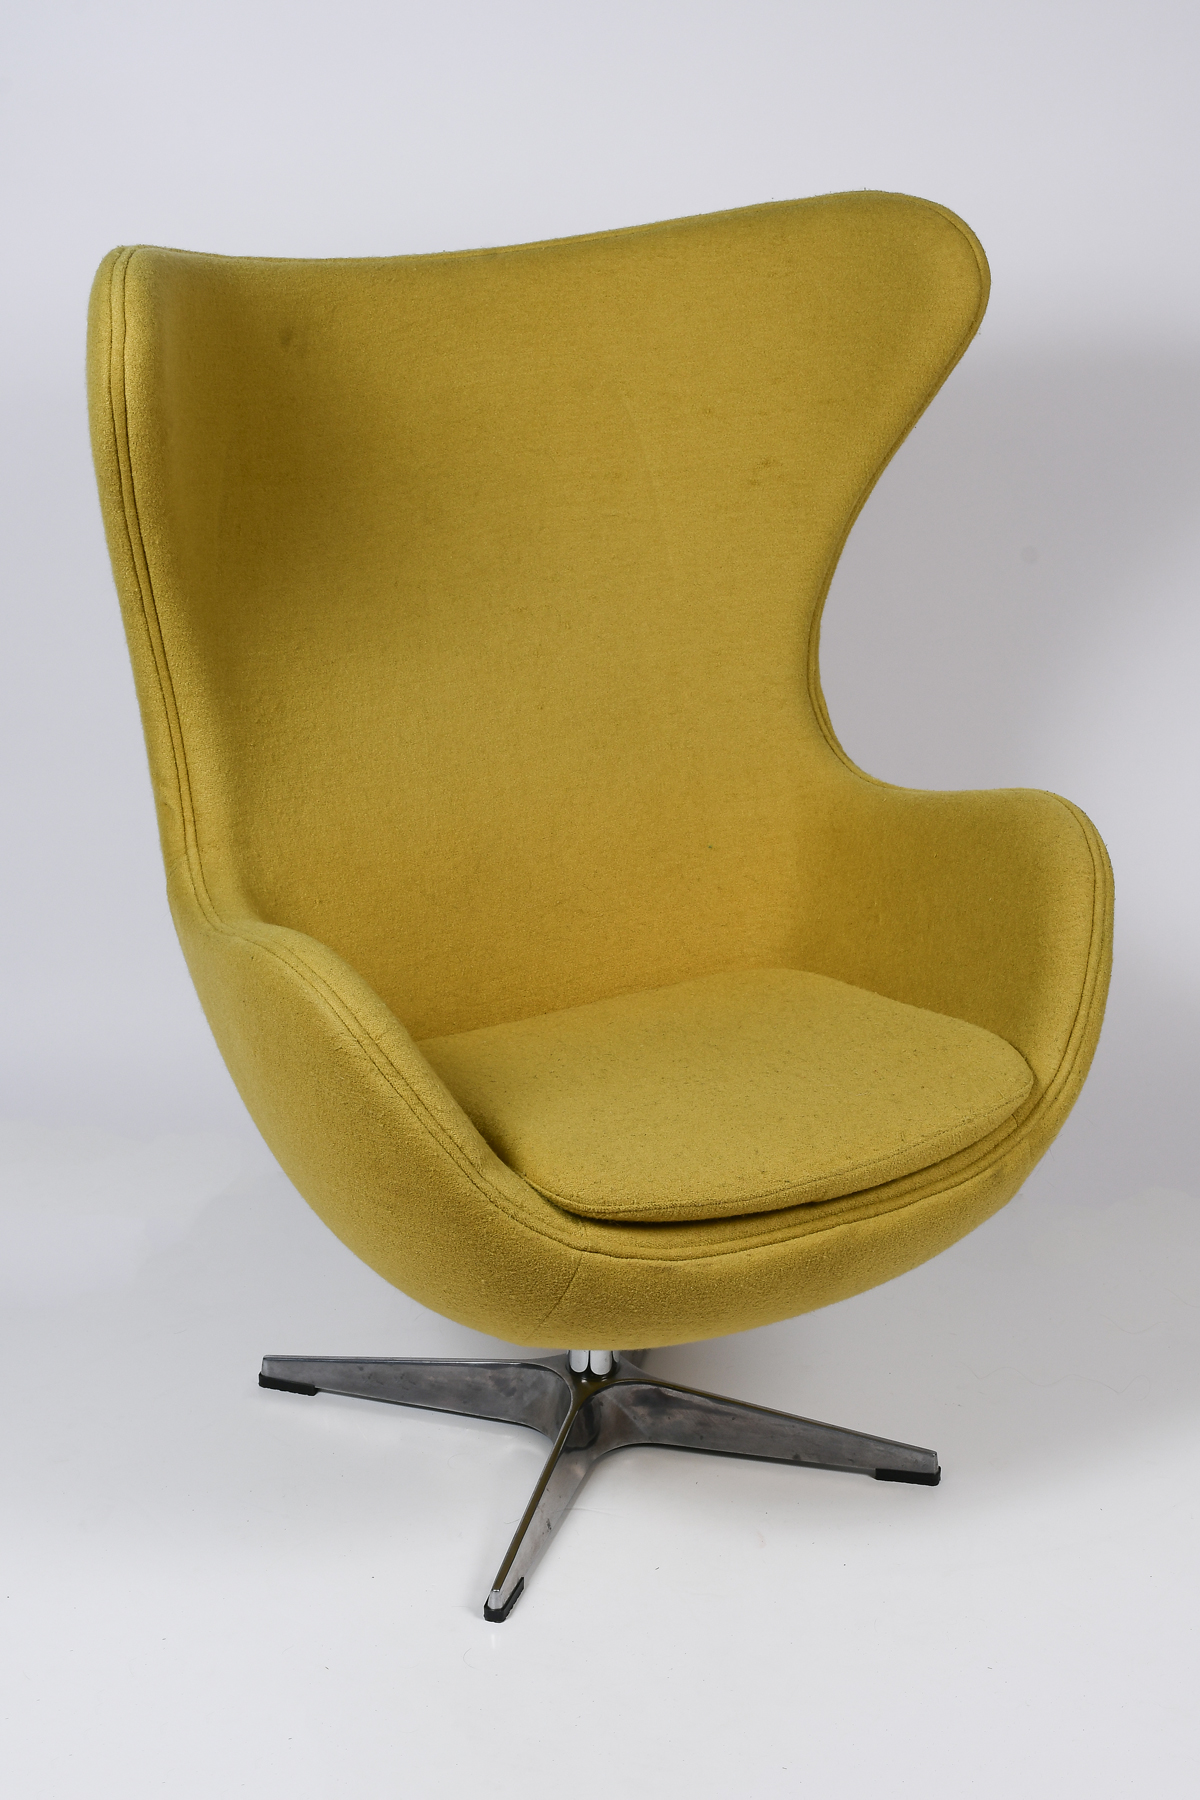 SWIVEL EGG CHAIR IN THE STYLE OF 36a48e